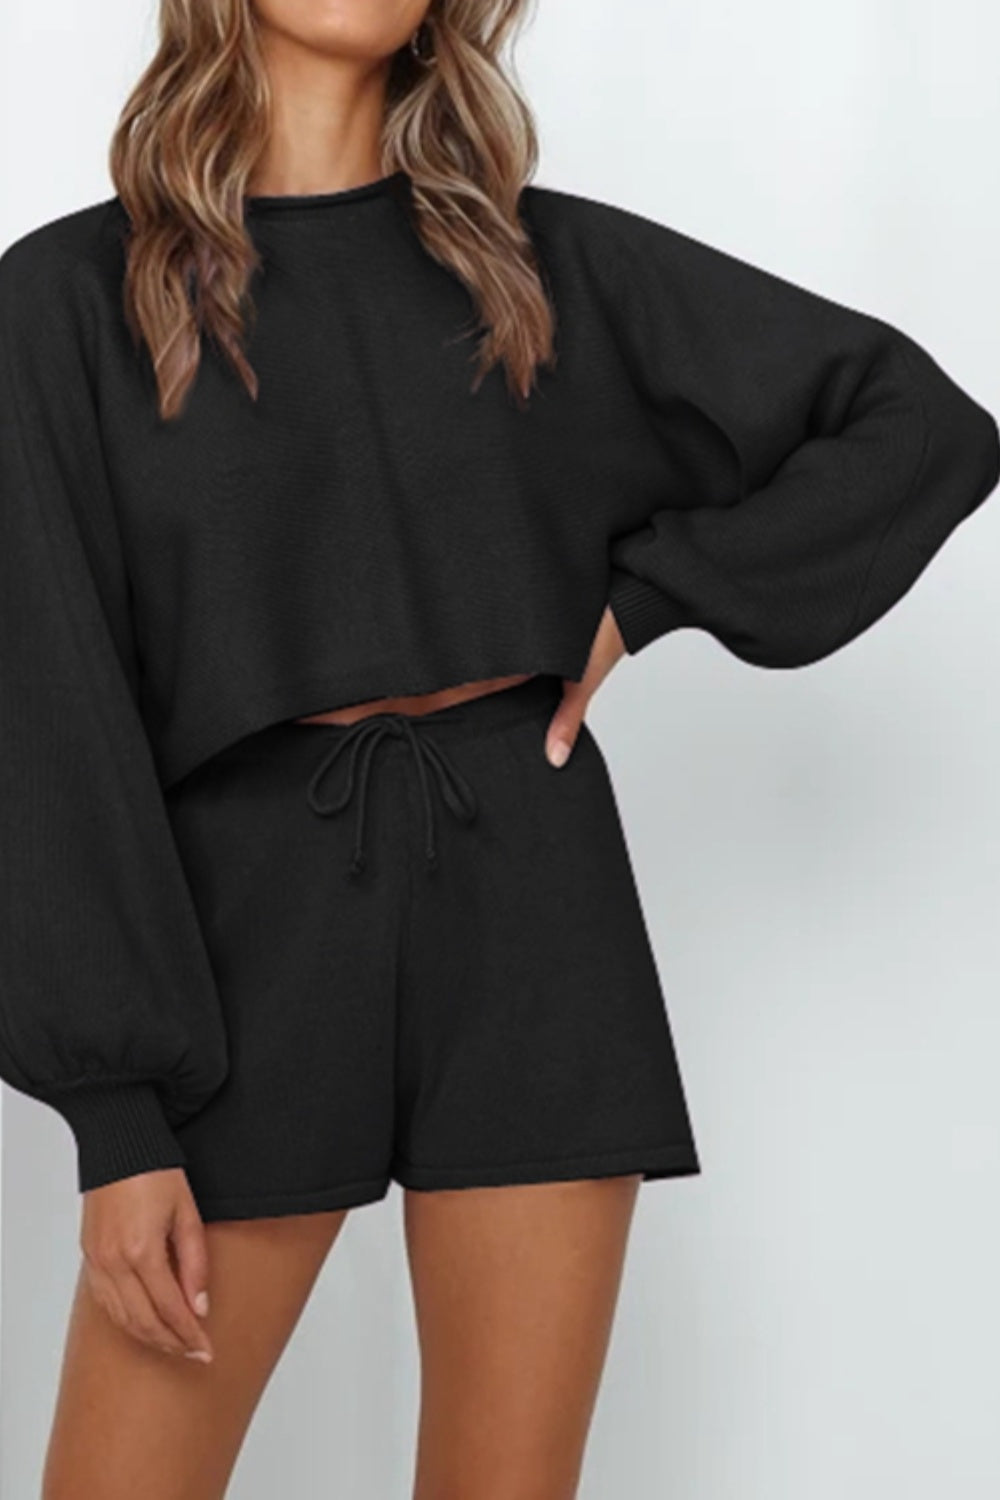 Round Neck Long Sleeve Top and Drawstring Shorts Lounge Set - Tophatter Deals and Online Shopping - Electronics, Jewelry, Beauty, Health, Gadgets, Fashion - Tophatter's Discounts & Offers - tophatters